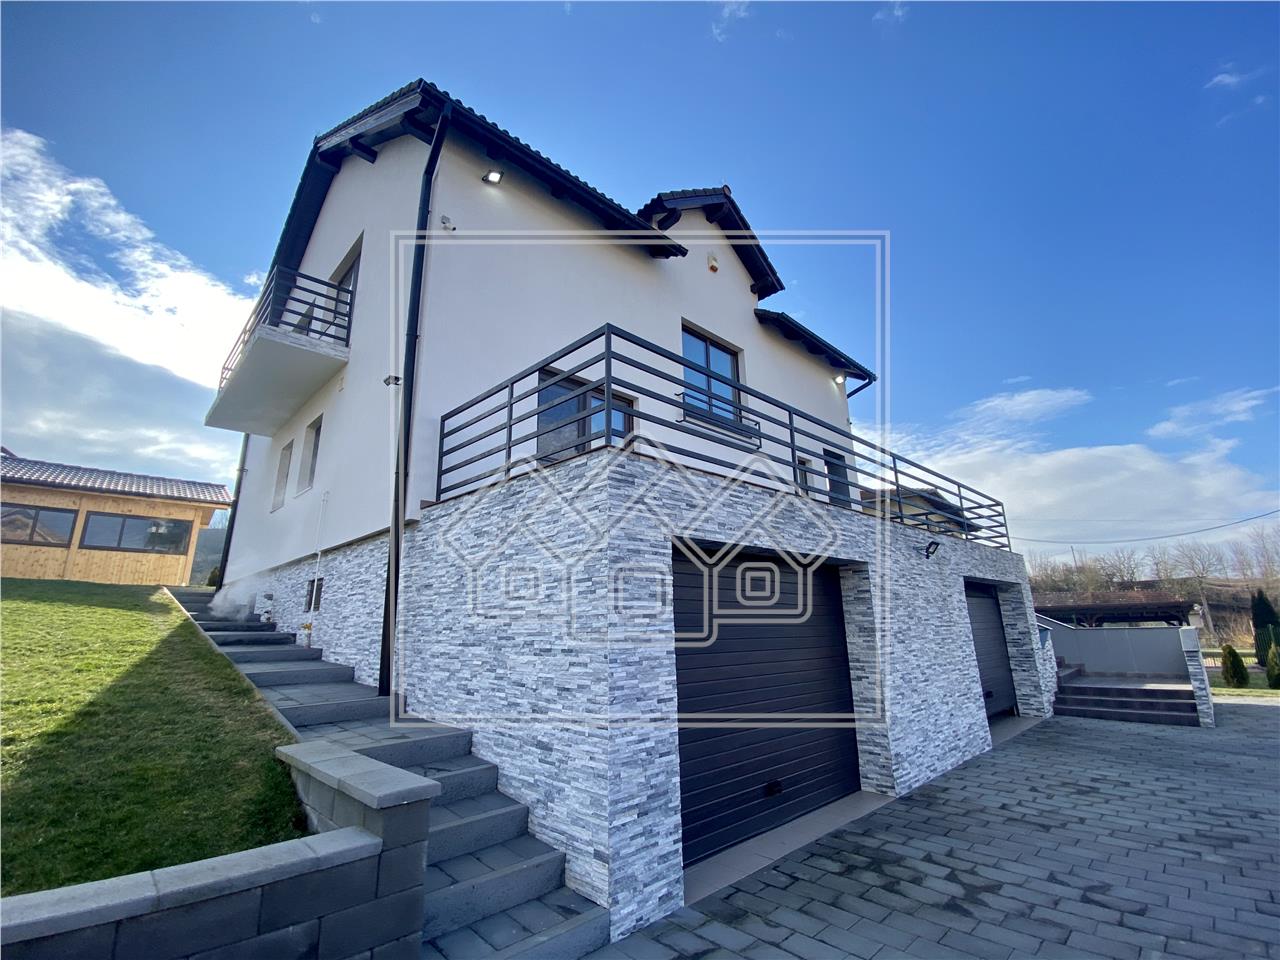 House for sale in Alba Iulia (Limba), individual property, 2 garages